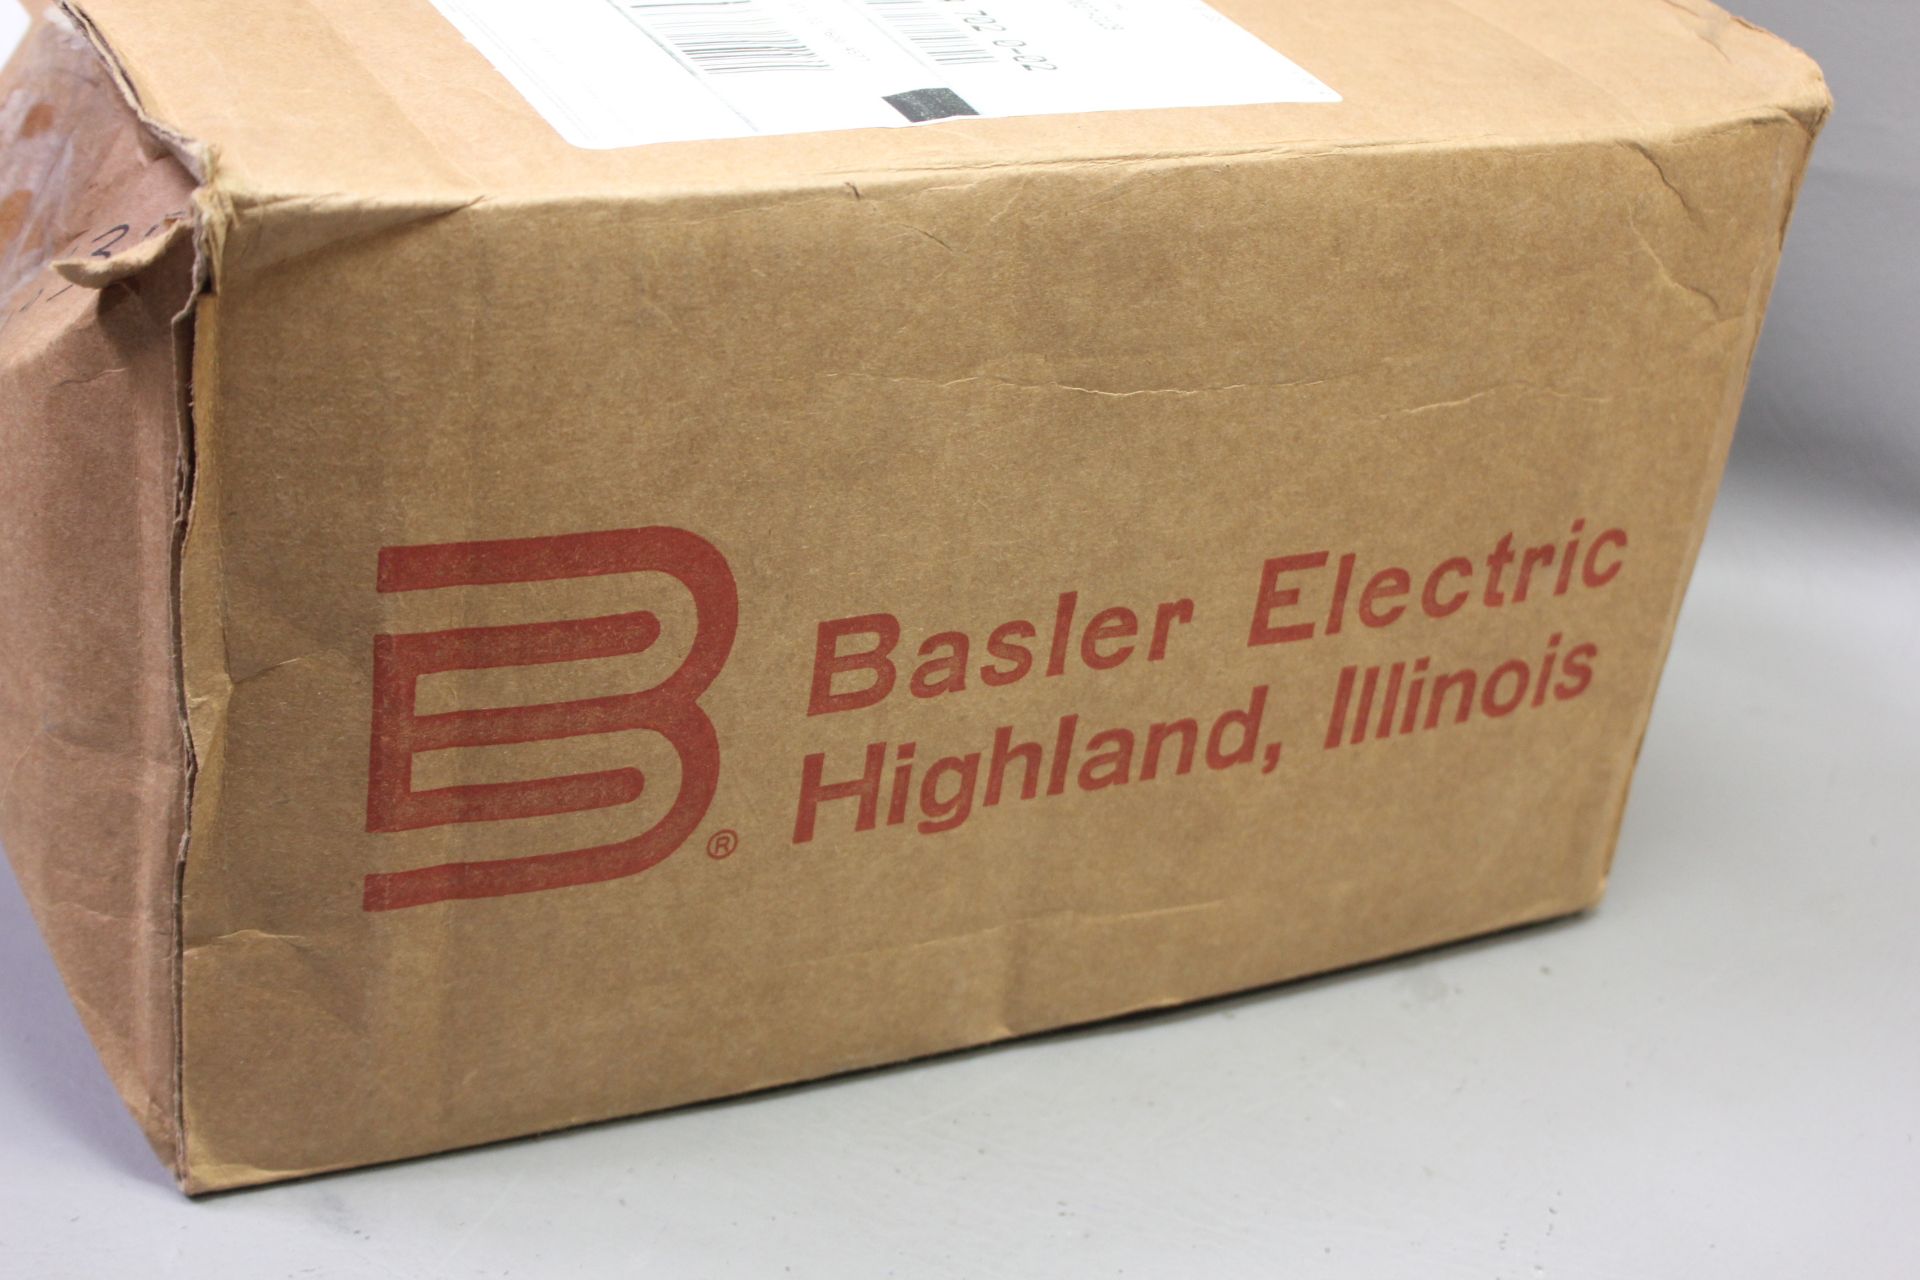 NEW BASLER ELECTRIC POTENTIOMETER - Image 3 of 9